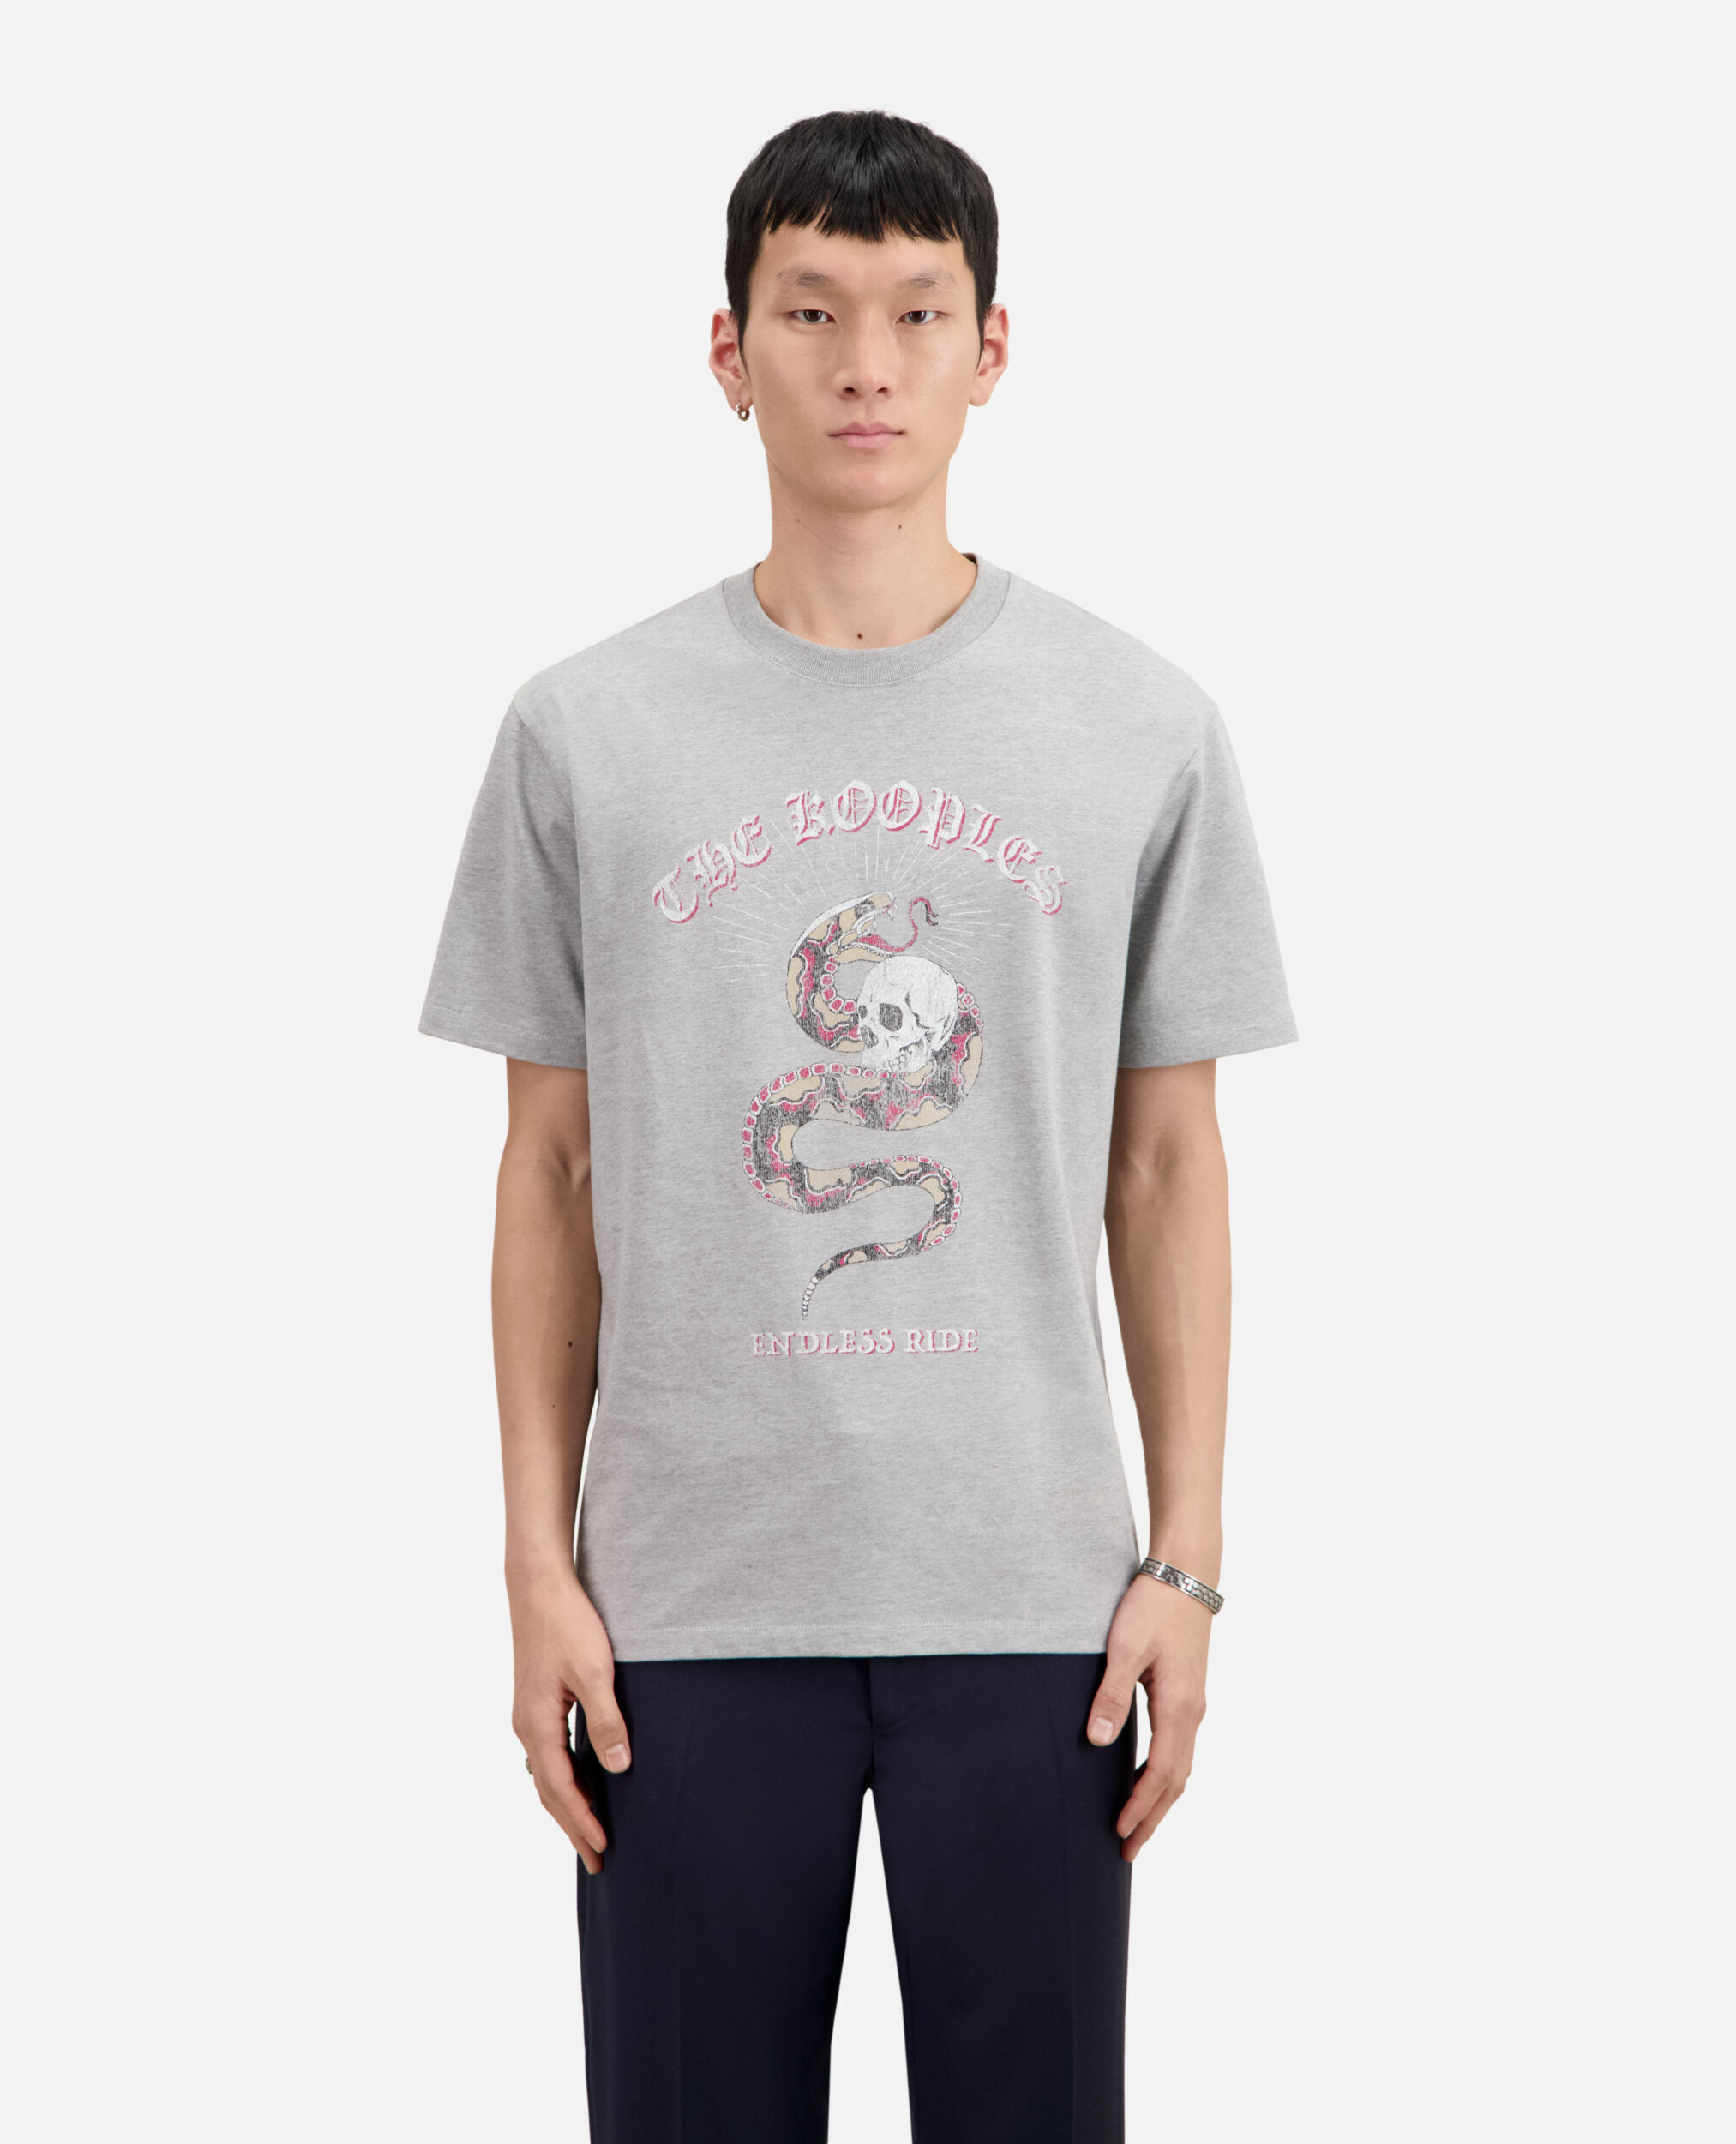 T-shirt Homme gris clair avec sérigraphie Sneaky snake, LIGHT GREY CHINE, hi-res image number null